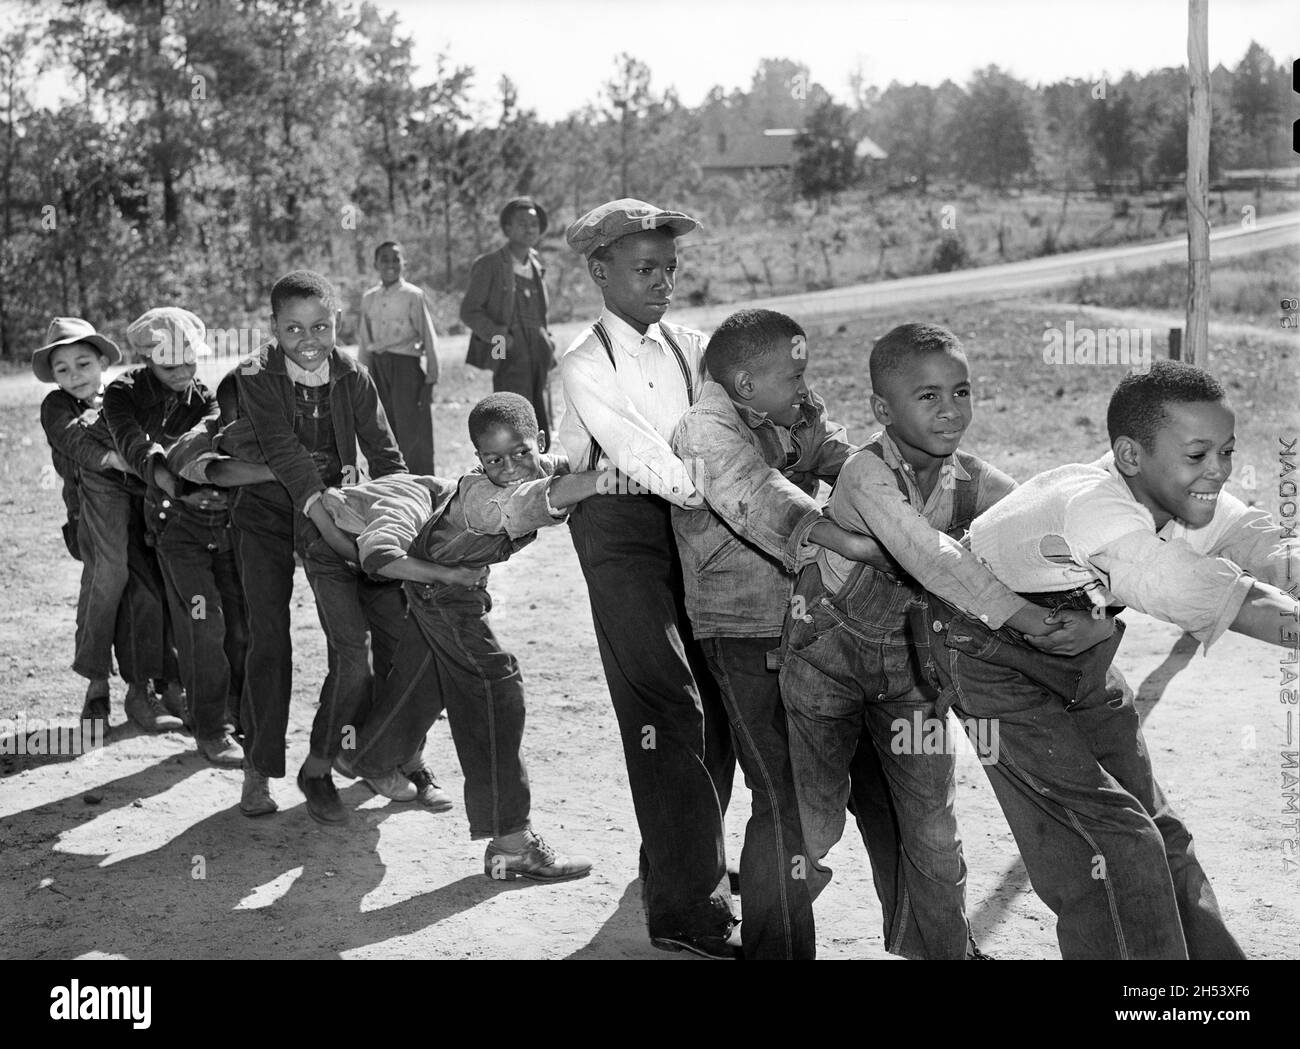 Group of Young Schoolboys playing during Recess, Alexander Community School, Greene County, Georgia, USA, Jack Delano, U.S. Farm Security Administration, U.S. Office of War Information Photograph Collection, November 1941 Stock Photo